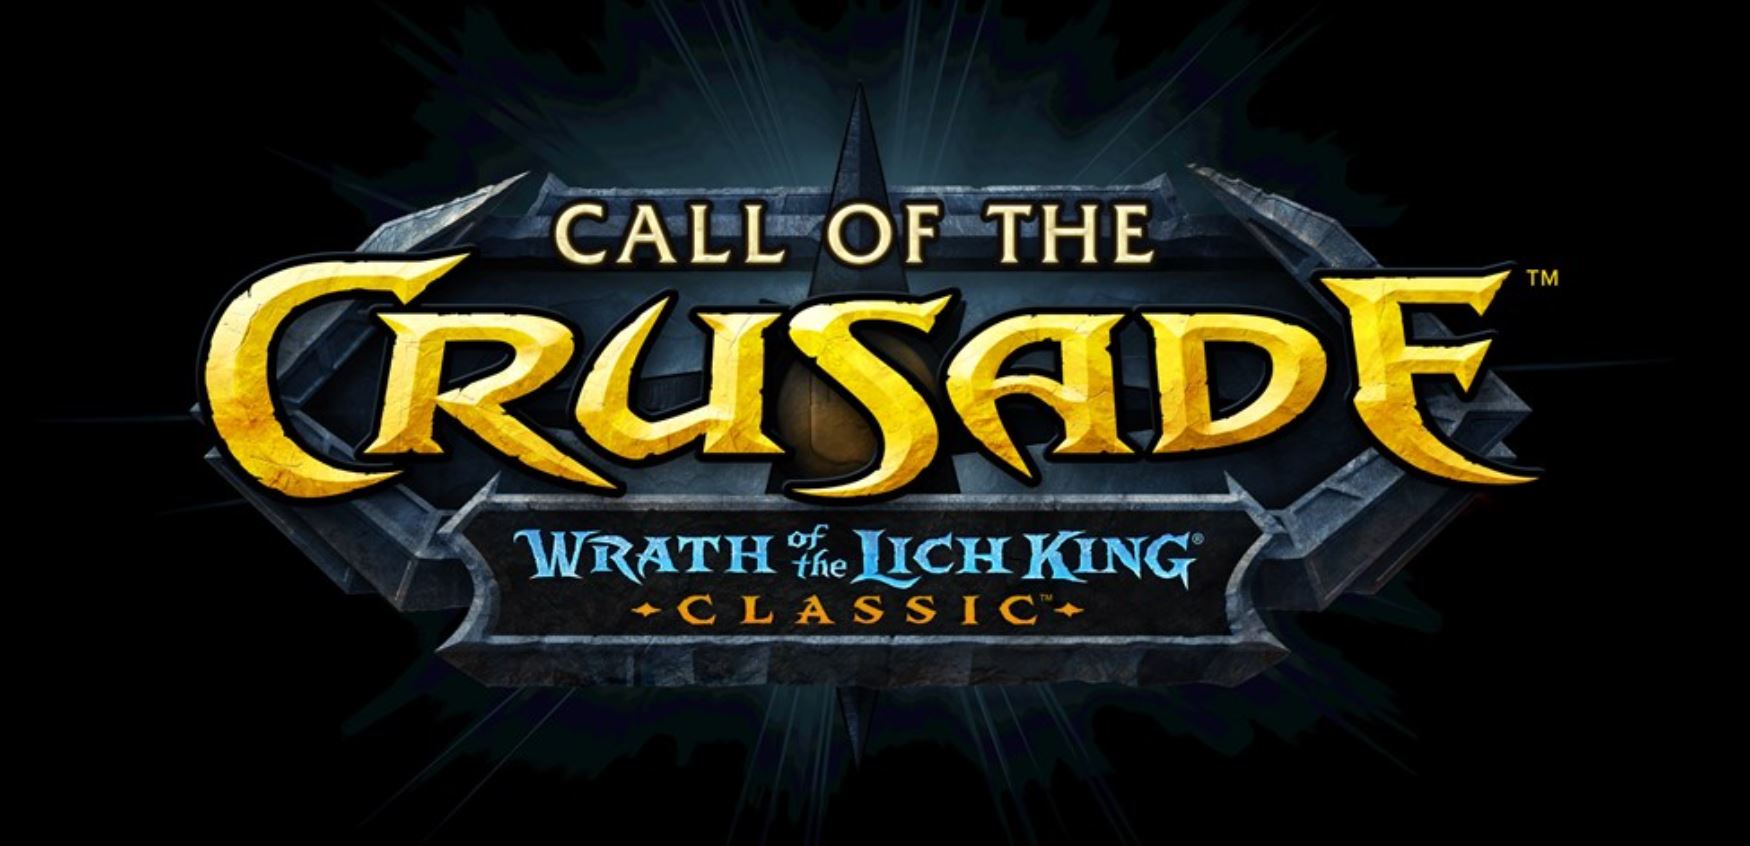 World of Warcraft Wrath Classic: Call of the Crusade disponibile